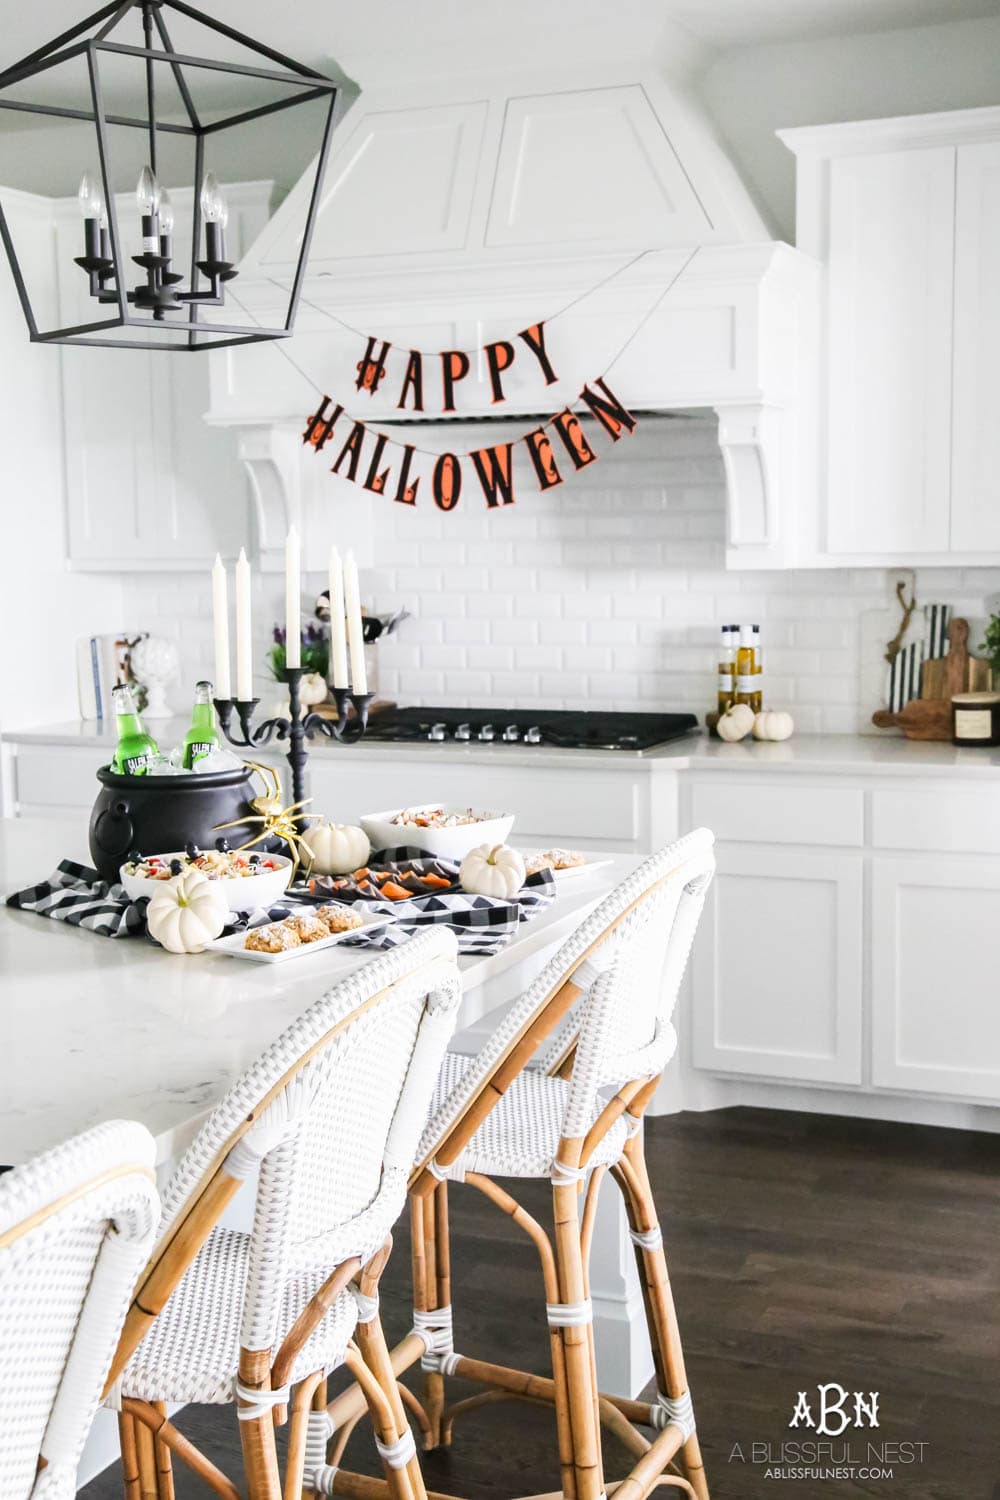 Tips and tricks to have your home ready for Halloween and the essential items you need to create a warm and inviting Halloween party. #ad #worldmarket #discoverworldmarket